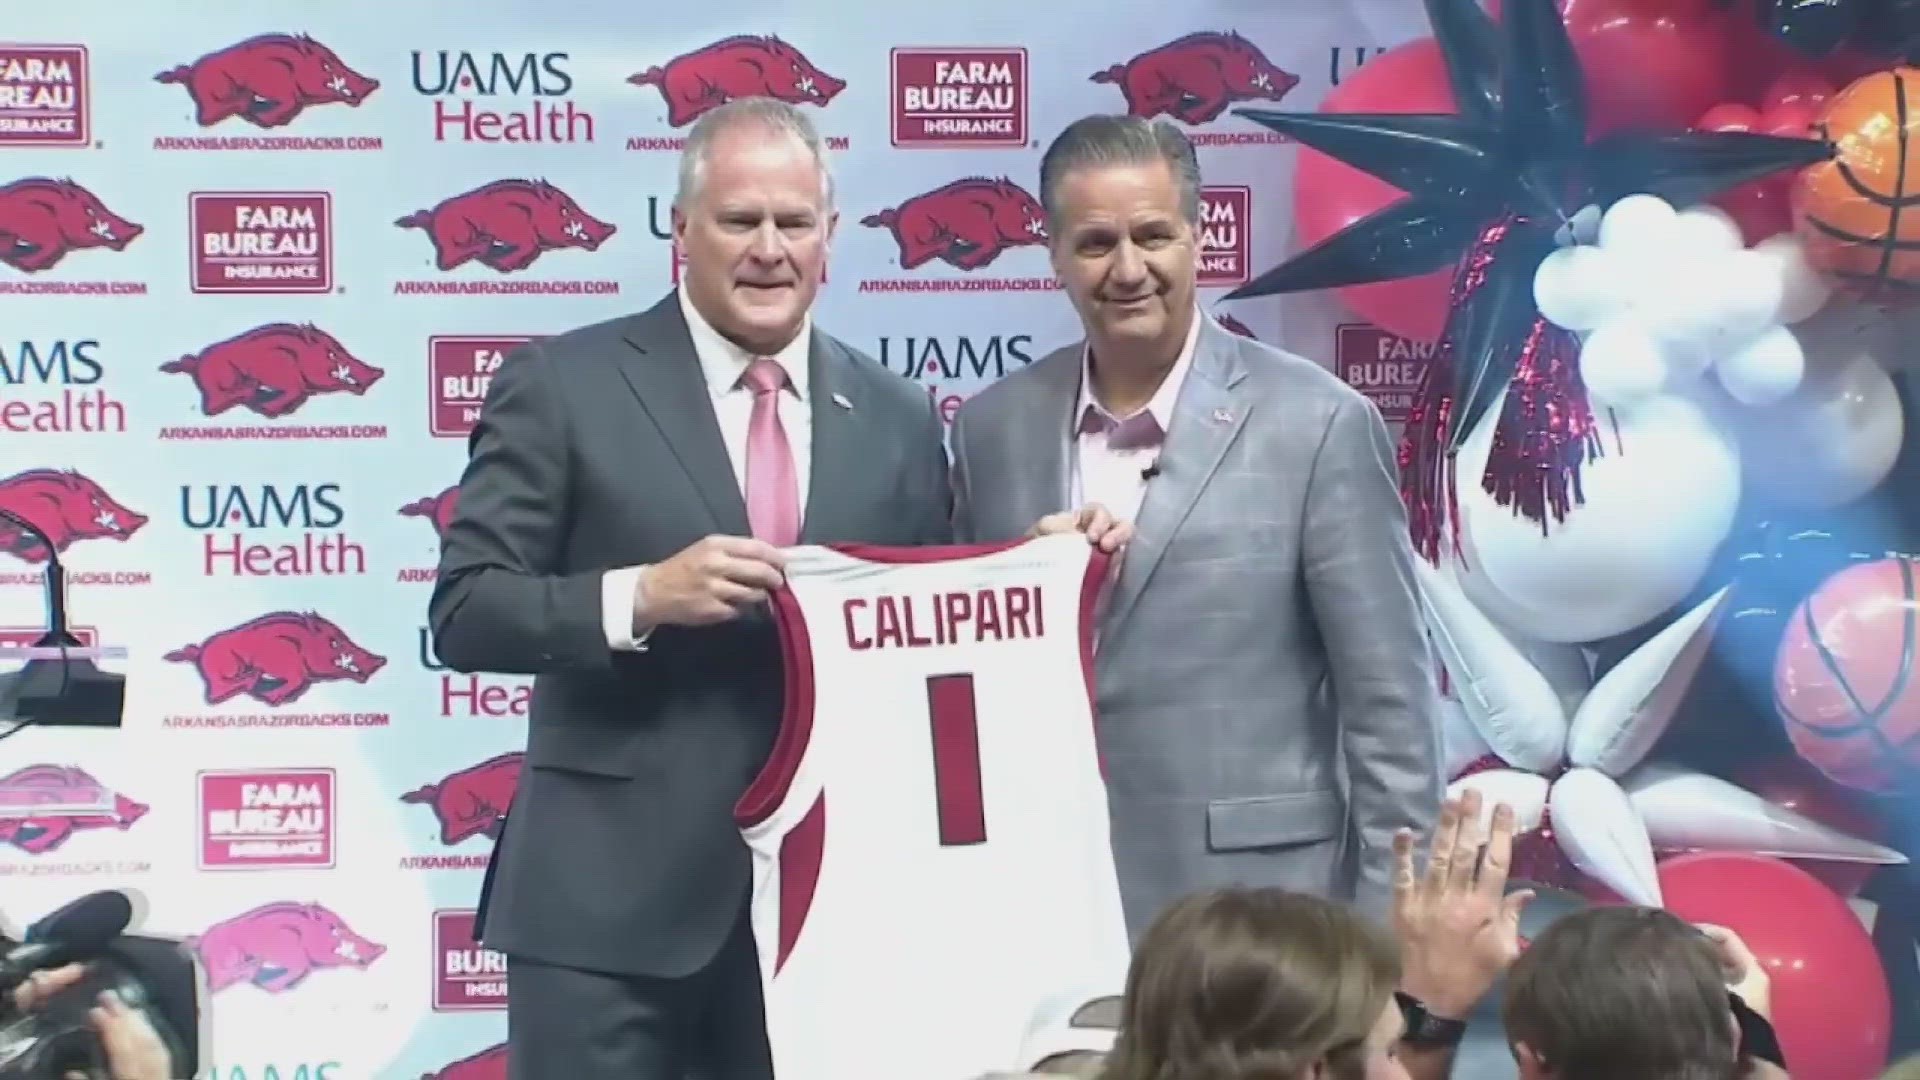 Arkansas officials introduced Calipari to a packed crowd at Bud Walton Arena.